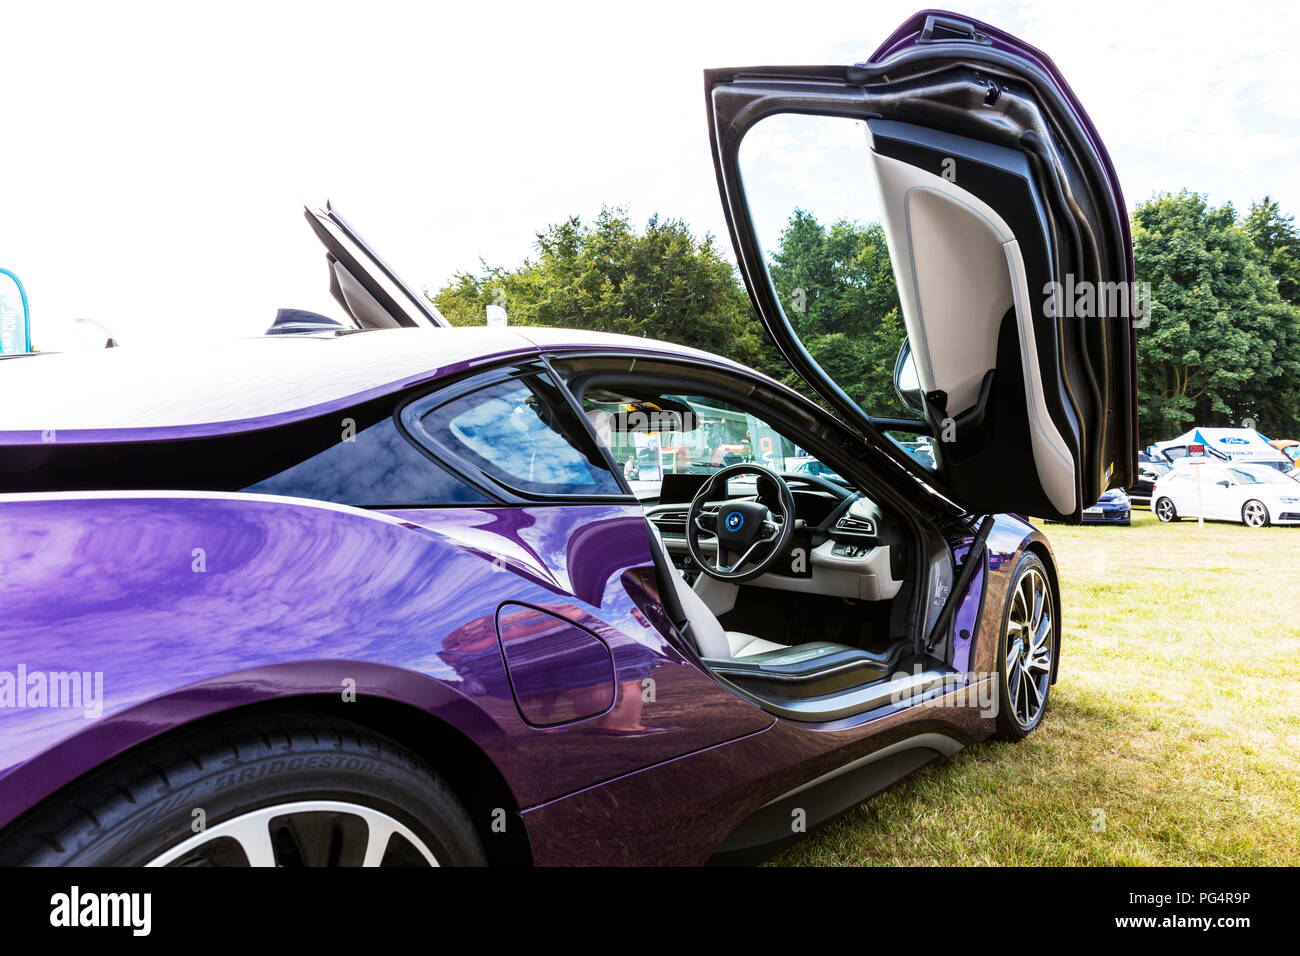 BMW i8 coupe car,  i8 coupe, sports car, electric car, electric sports car,  i8 coupe car, BMW car, BMW cars, BMW  i8 coupe, BMW i8, gull wing doors, Stock Photo